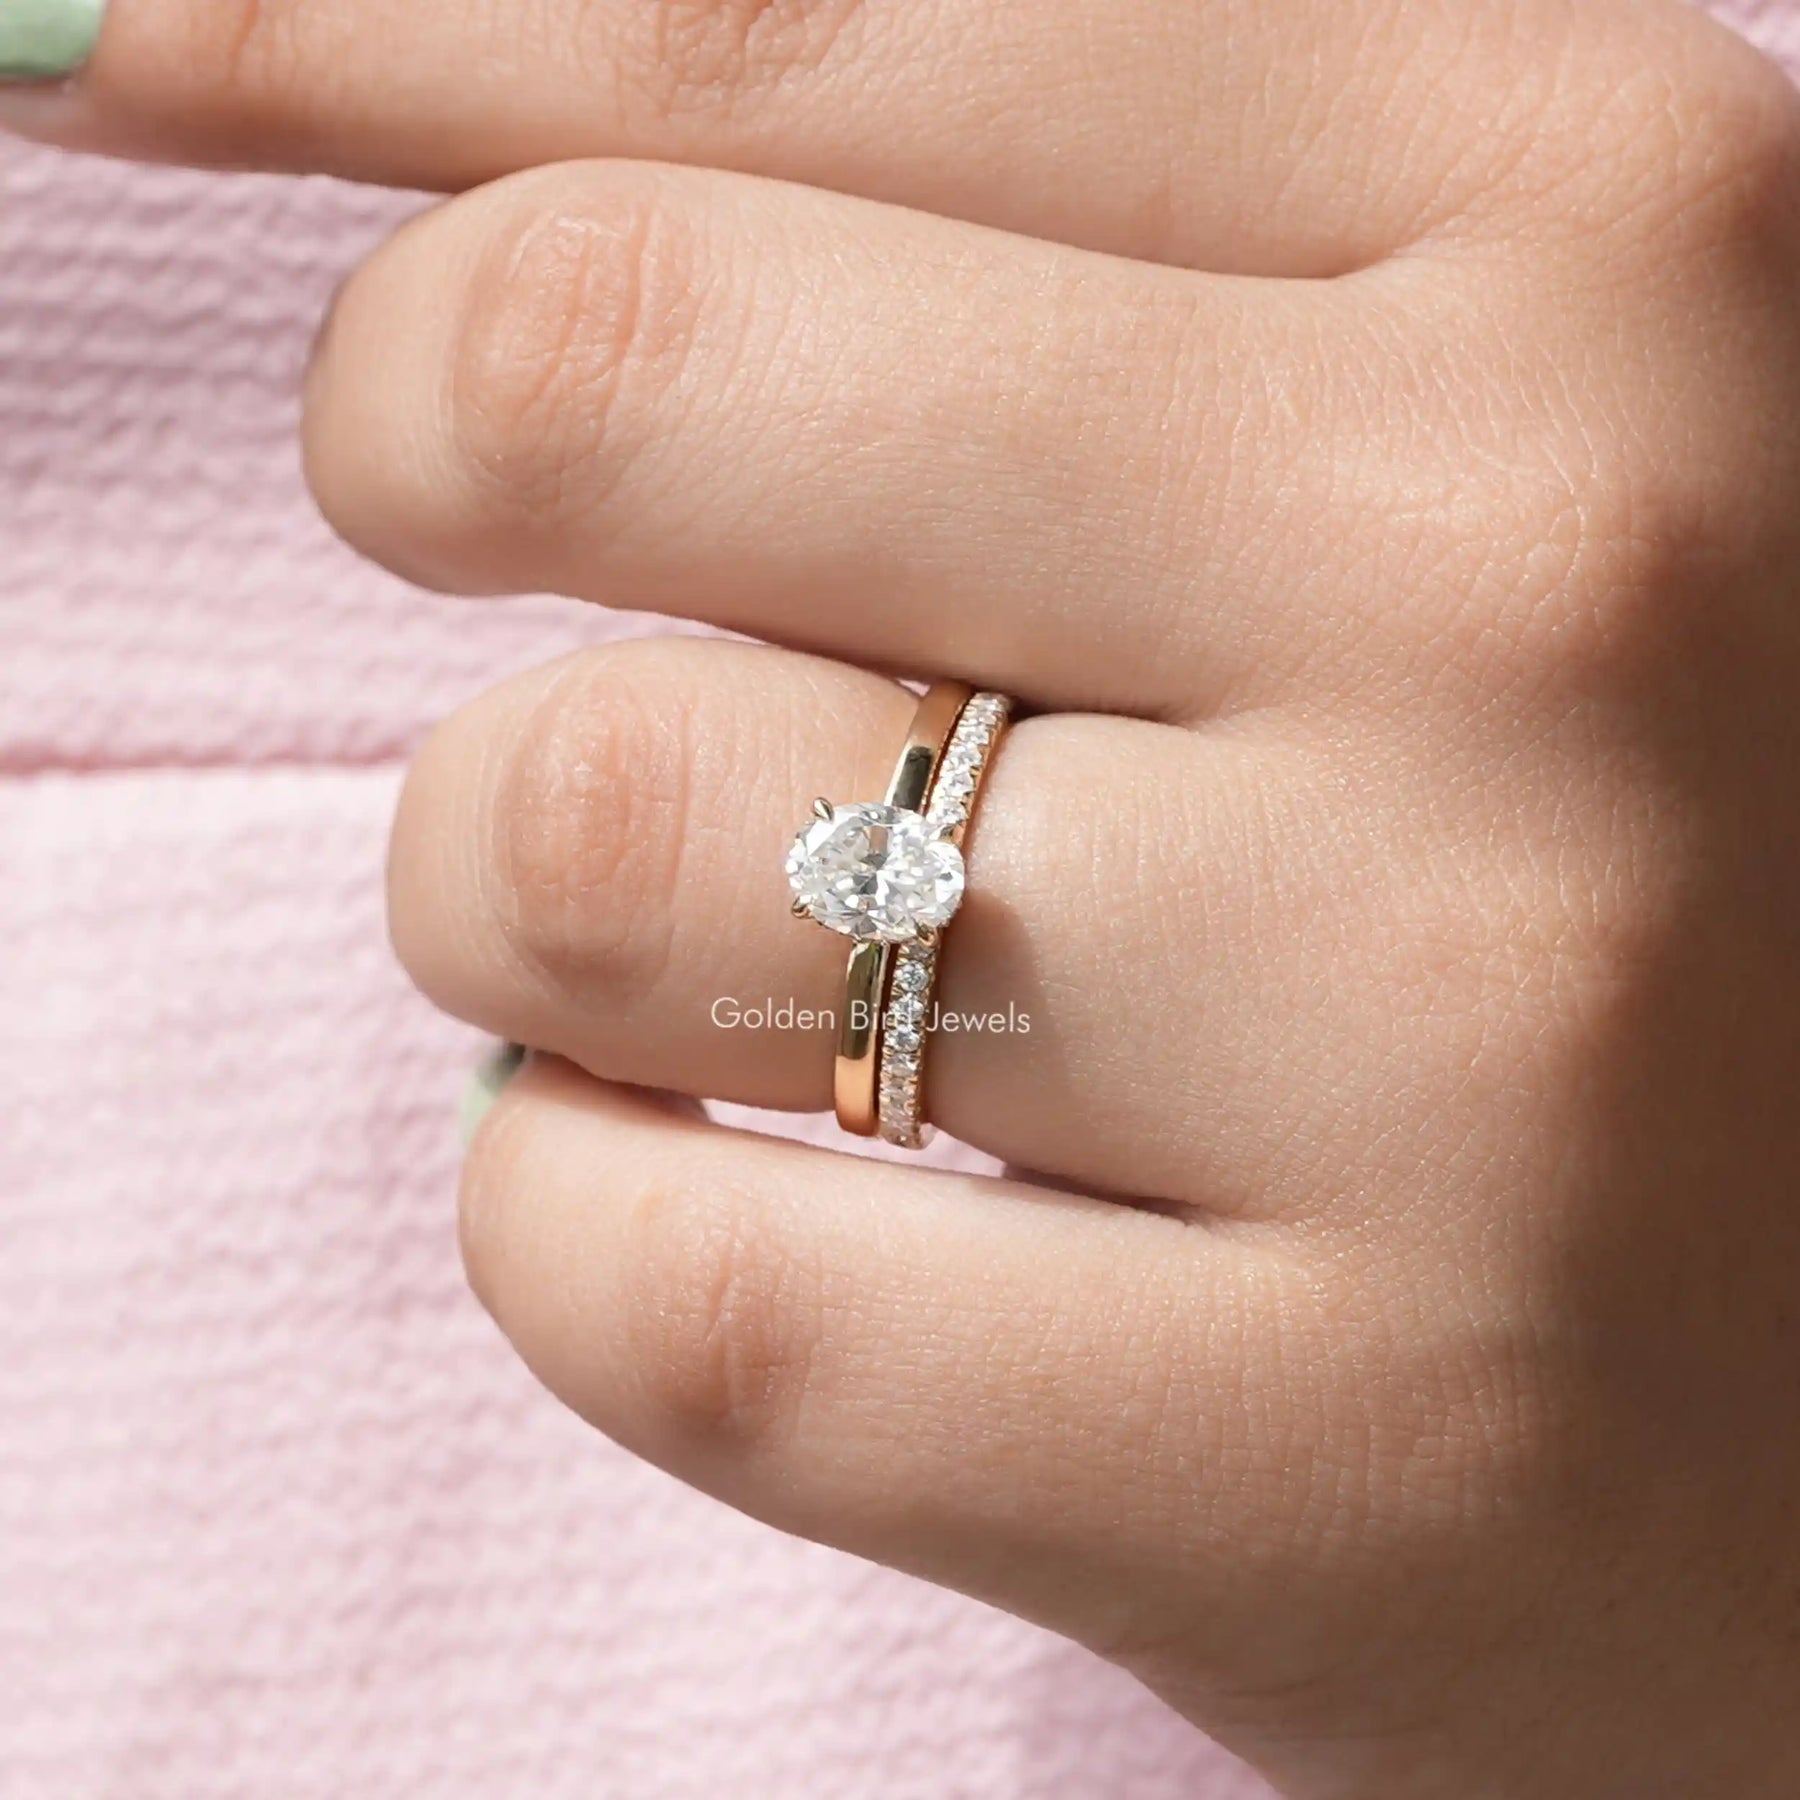 [In finger front view of oval cut moissanite ring made of four prongs in 14k yellow gold]-[Golden Bird Jewels]